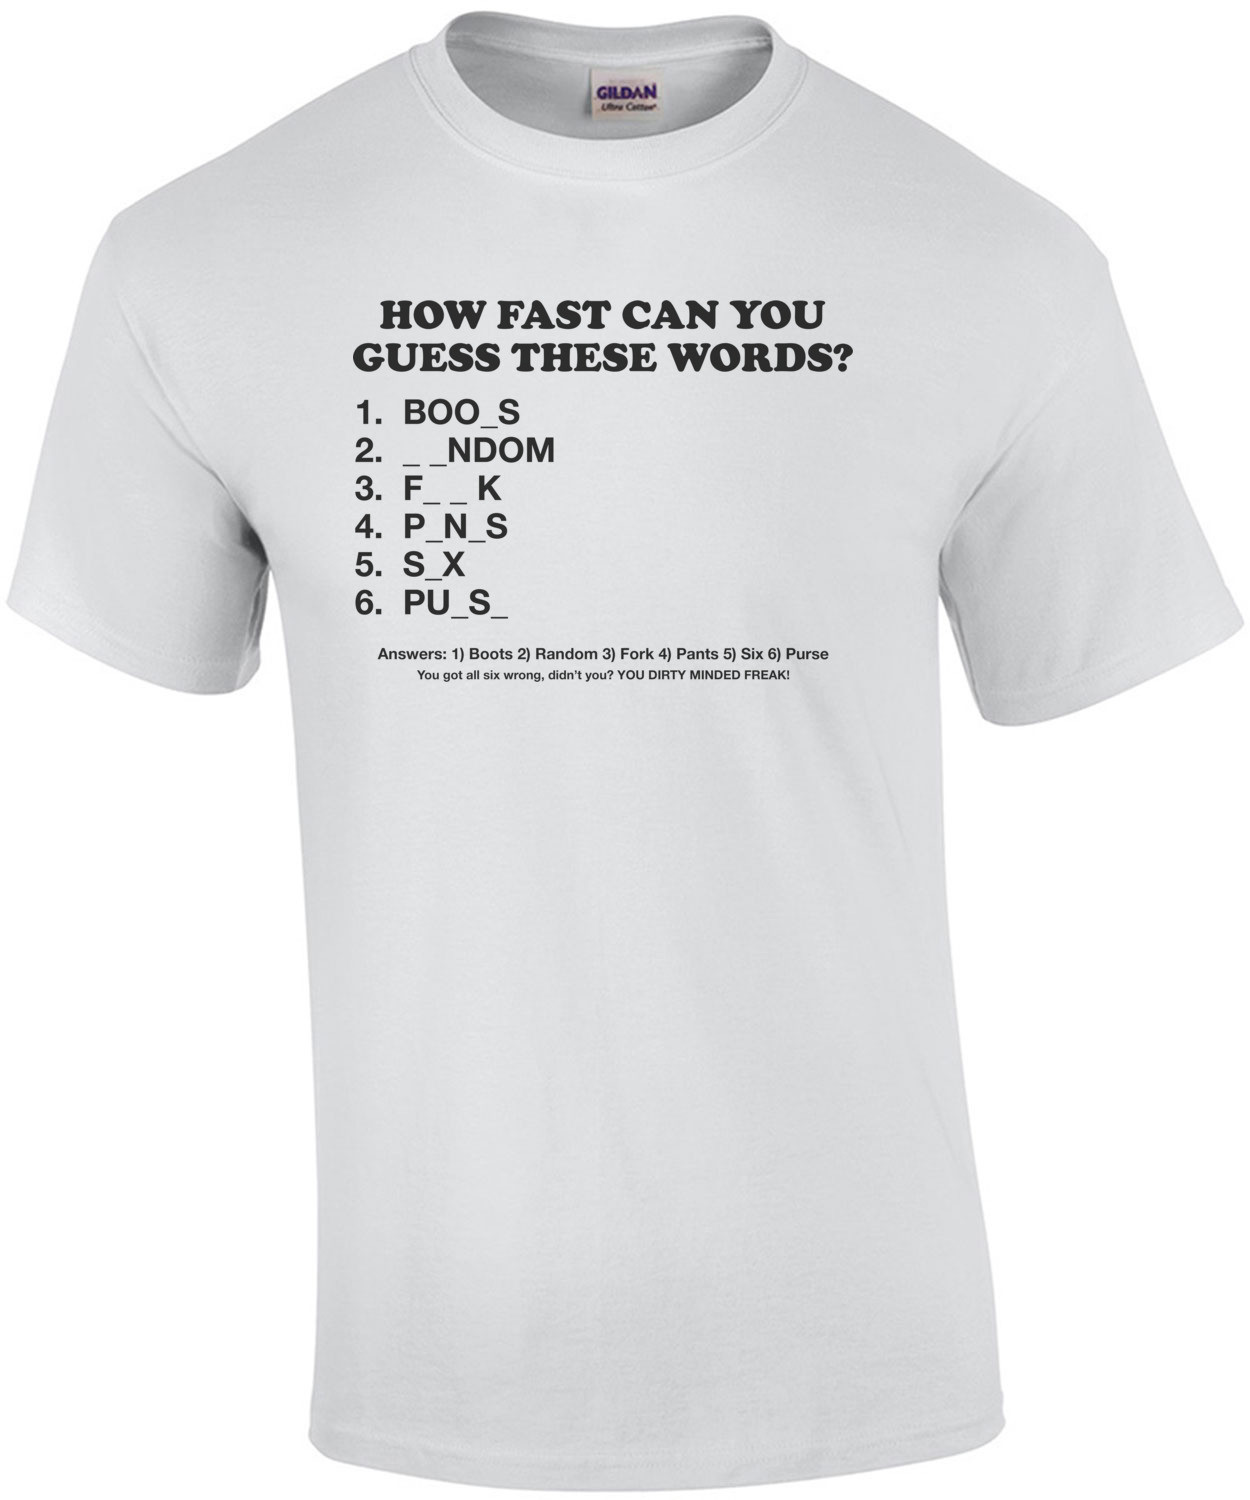 How Fast Can You Guess These Words? Shirt